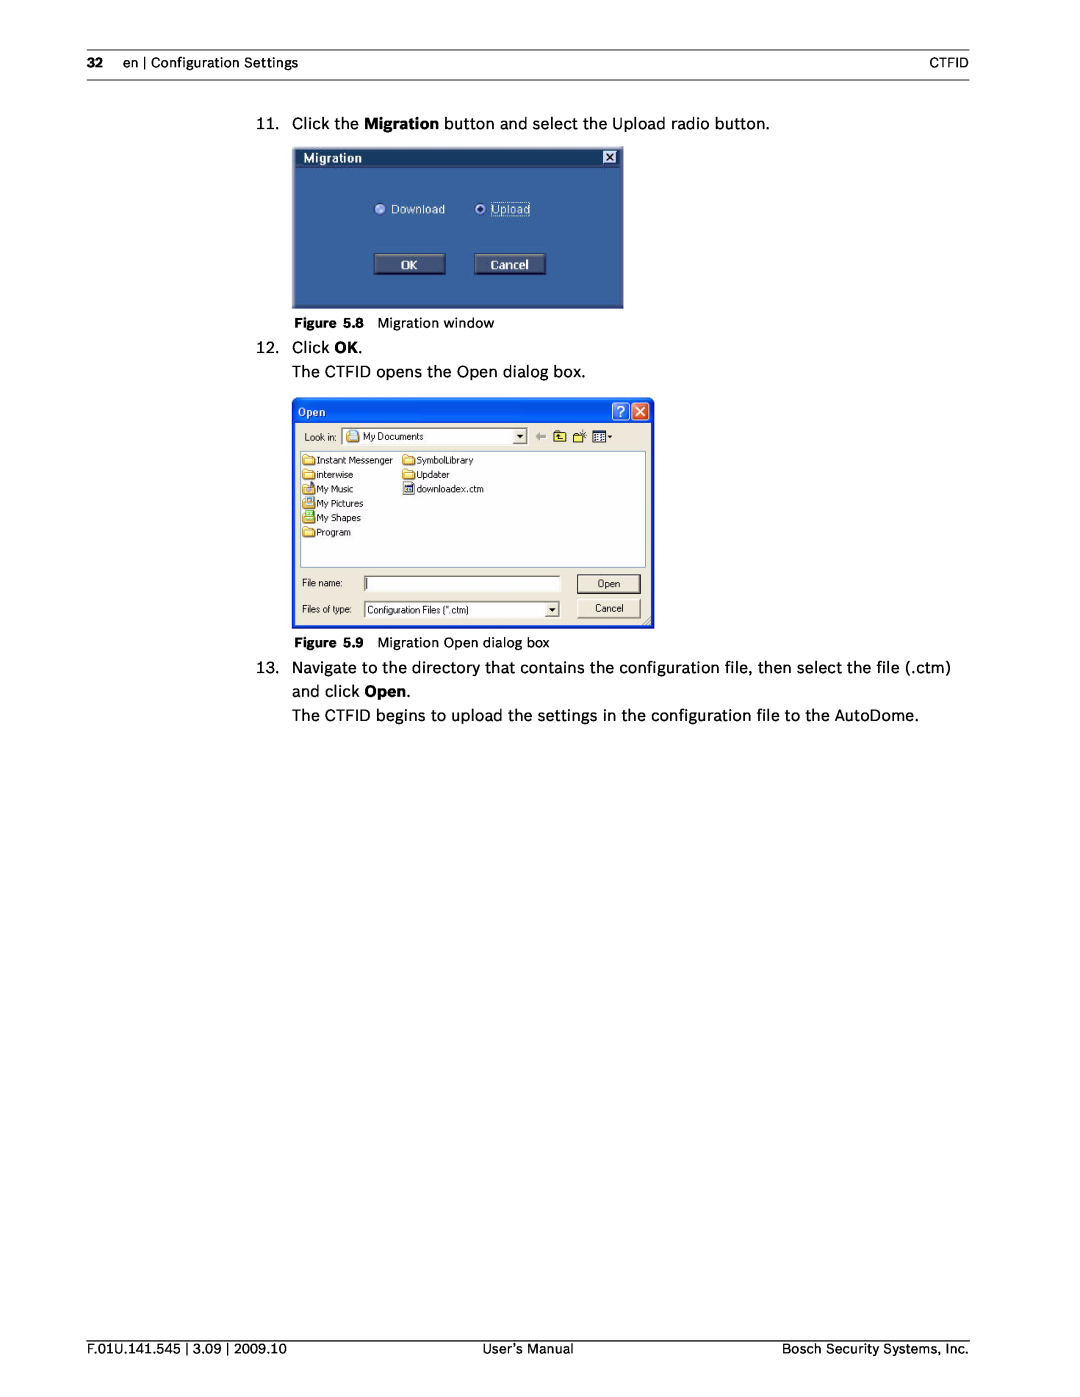 Bosch Appliances VP-CFGSFT user manual Click OK The CTFID opens the Open dialog box 